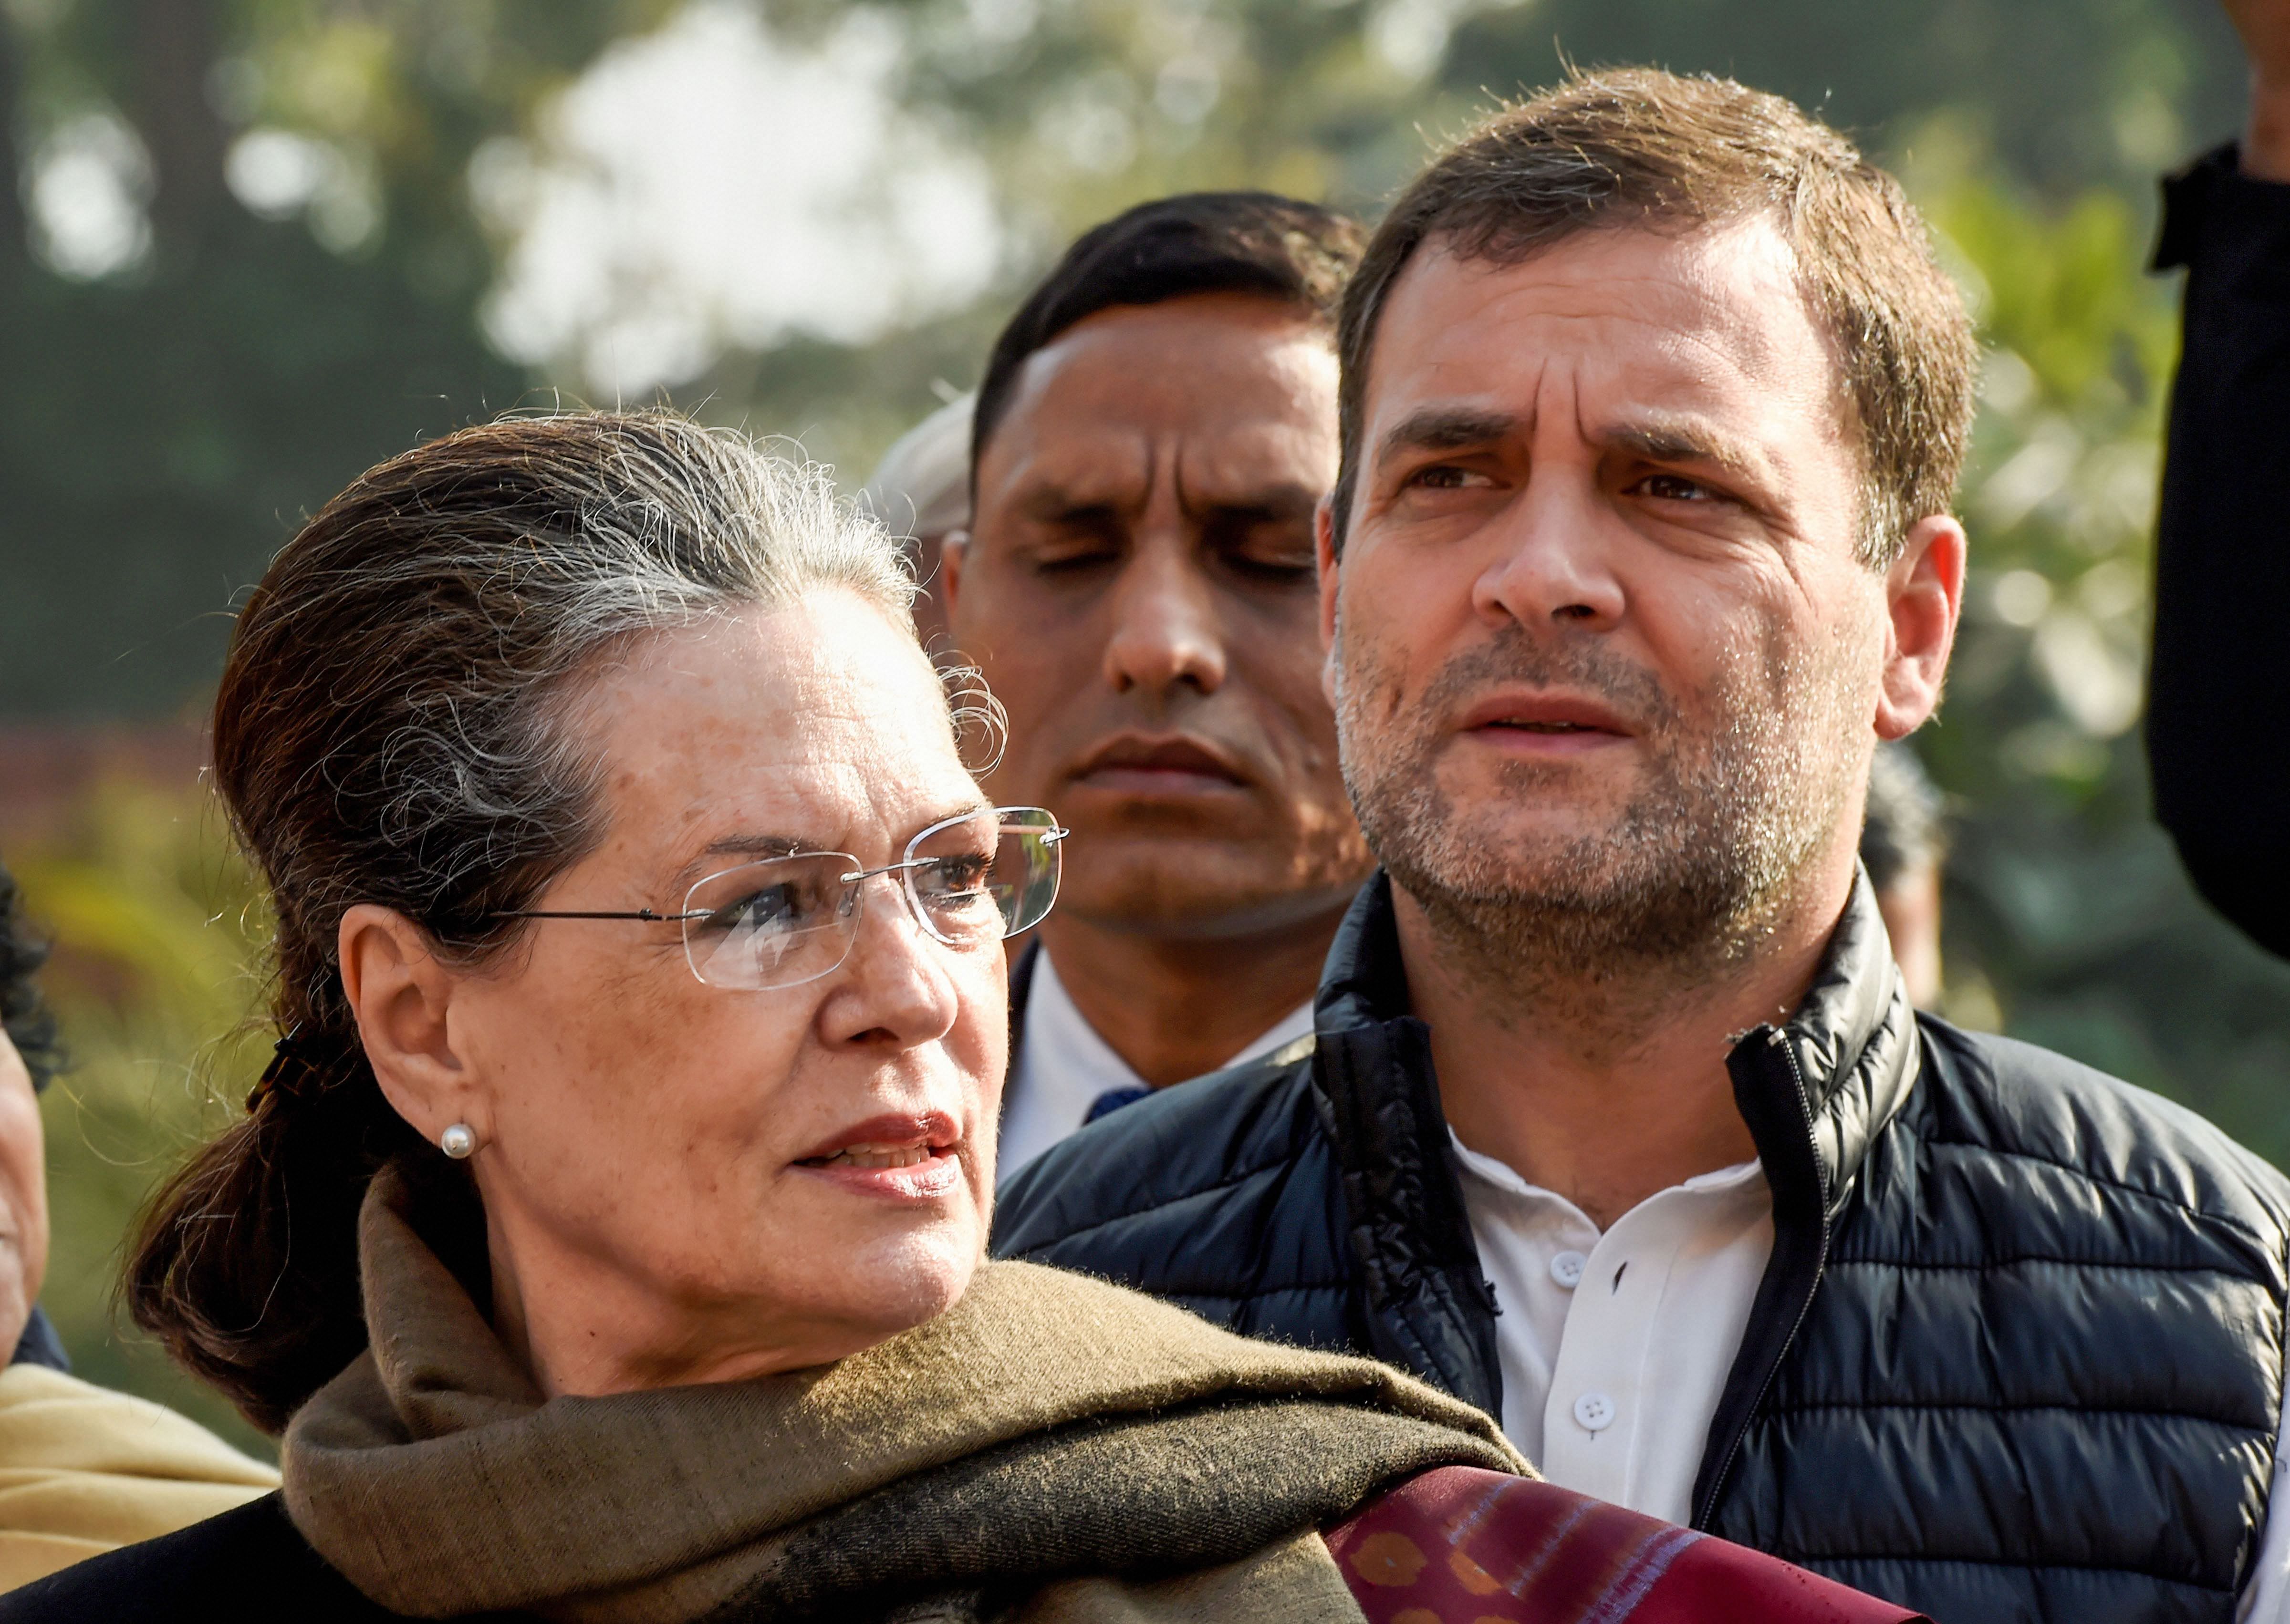 Opposition leaders including Sonia Gandhi (L) and Rahul Gandhi. (PTI Photo)